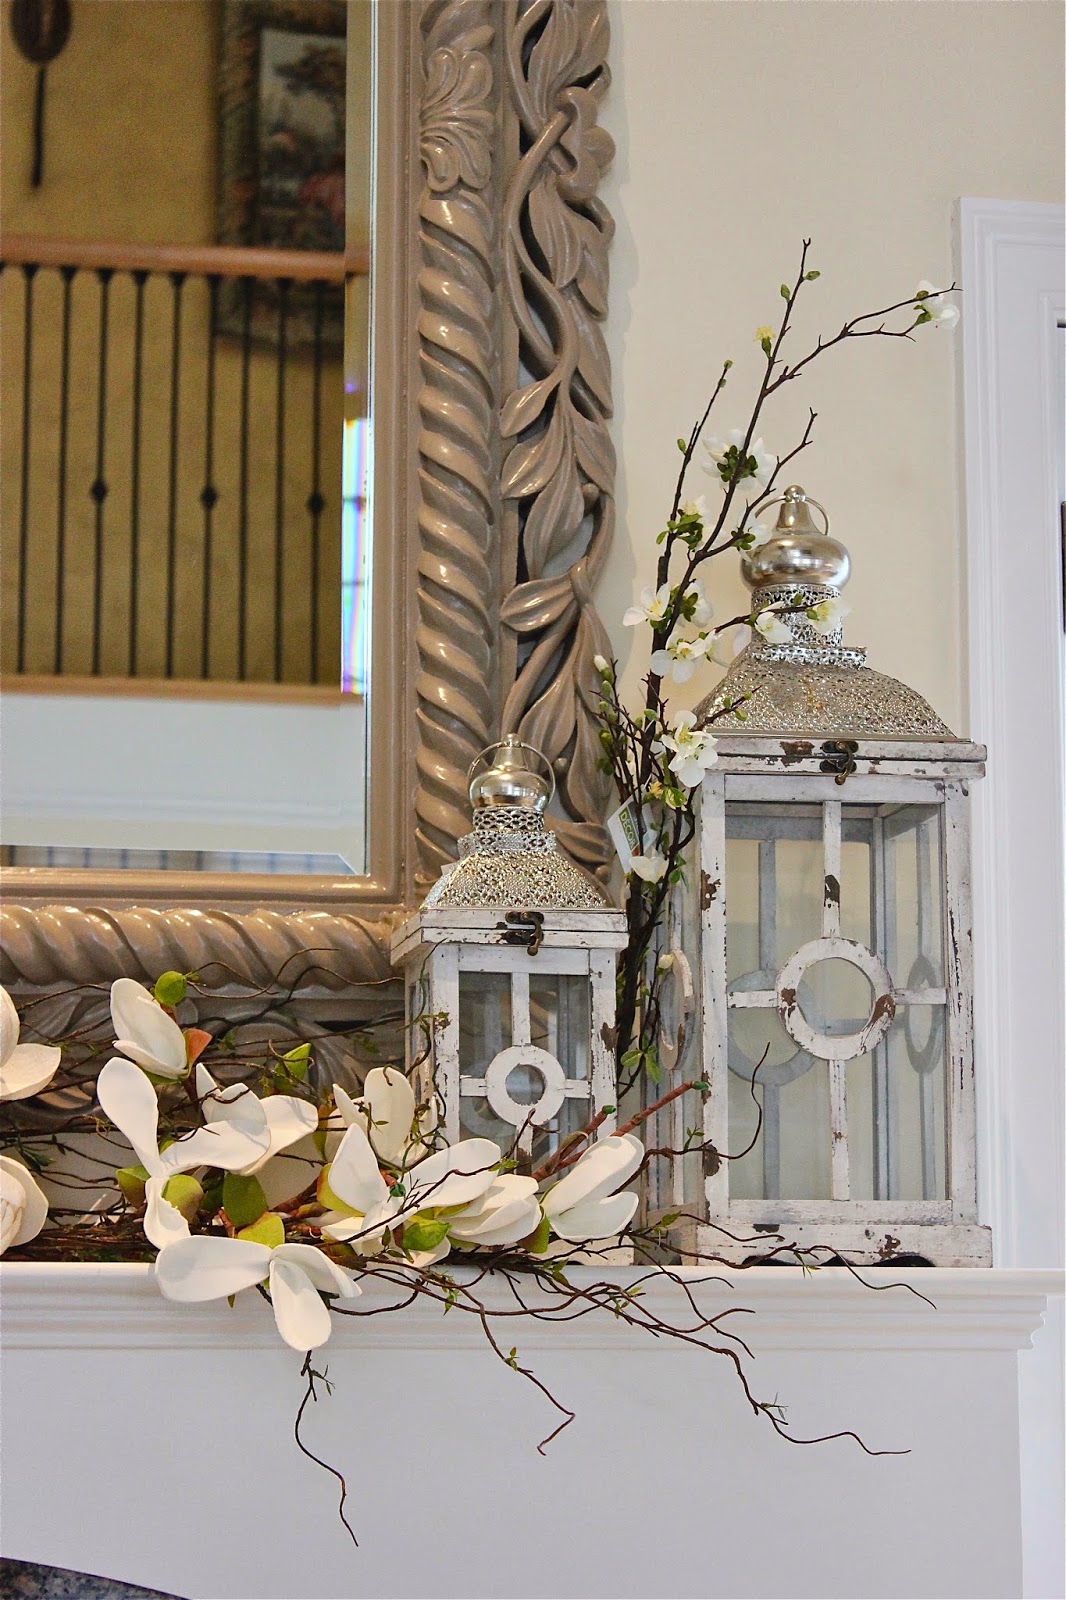 Maison Decor: Styling a mantle with lanterns and florals